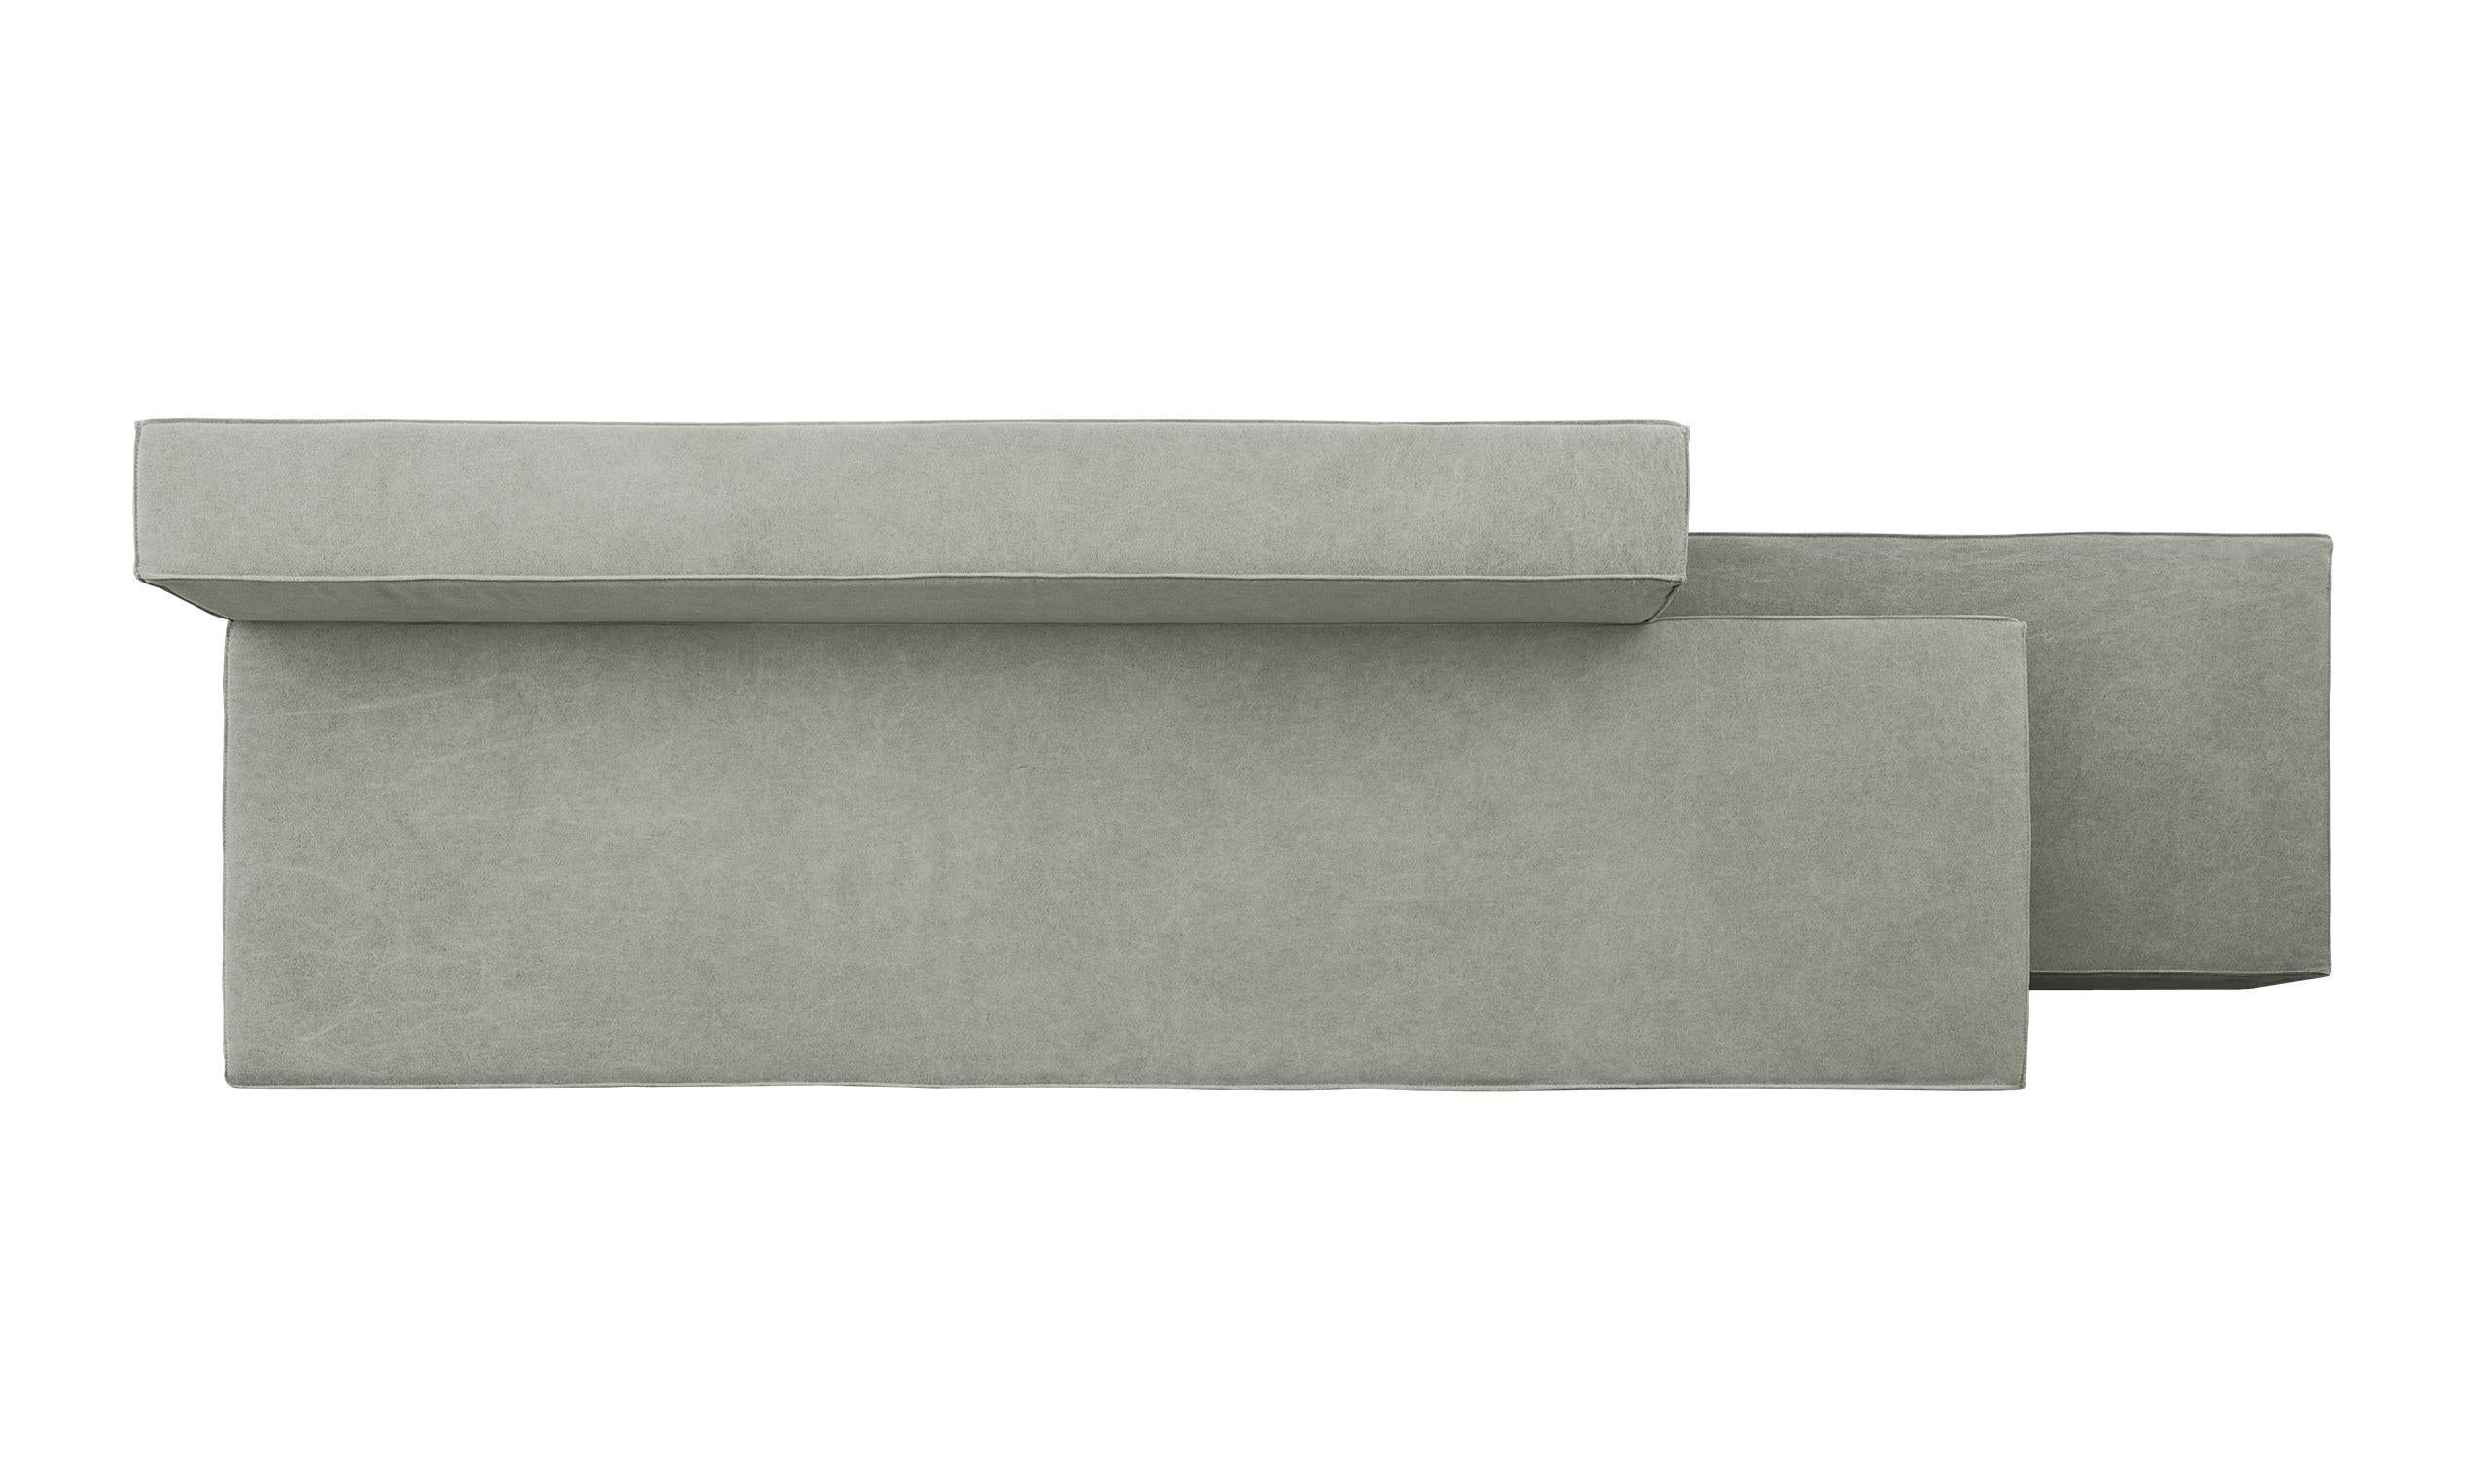 Brazilian Minimalist PK2 Sofa in Fendi Green Canvas Upholstery by Paulo Kobylka In New Condition For Sale In Londrina, Paraná